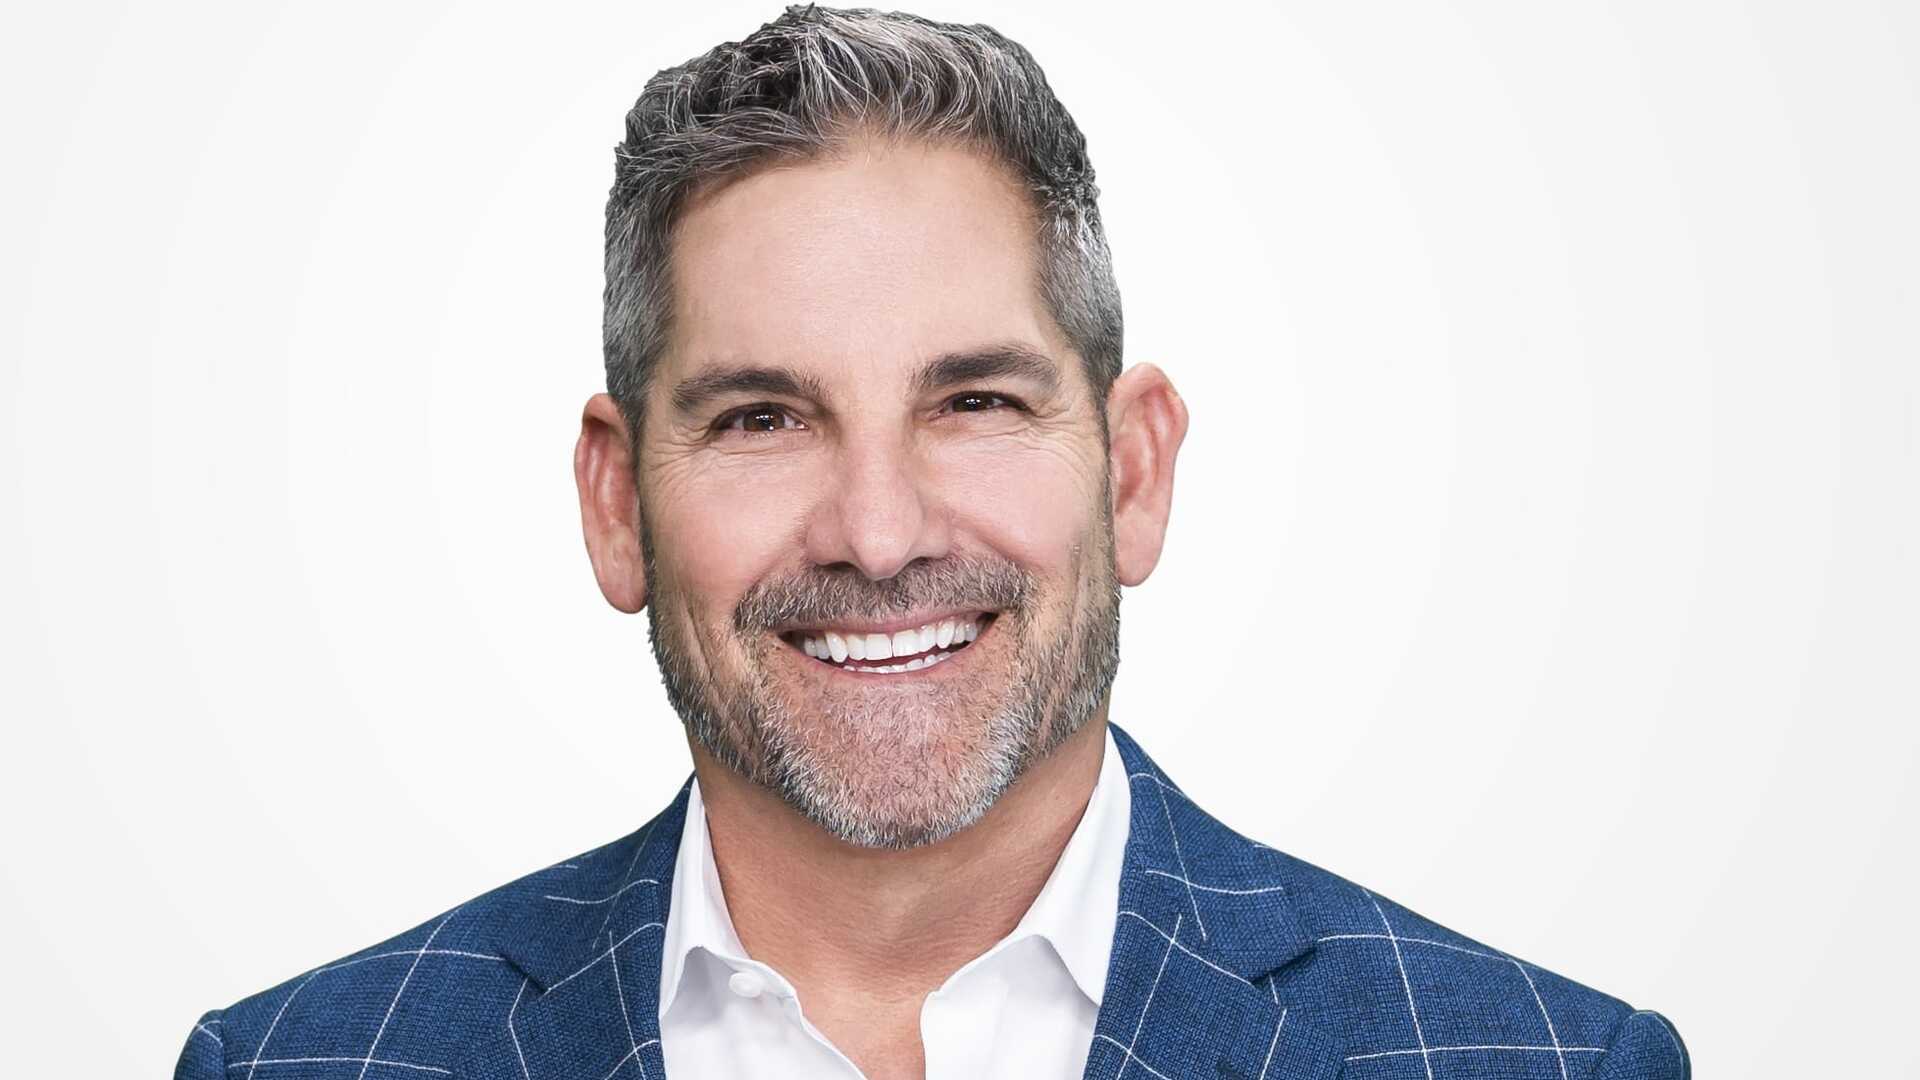 Grant Cardone Net Worth And Source Of Income